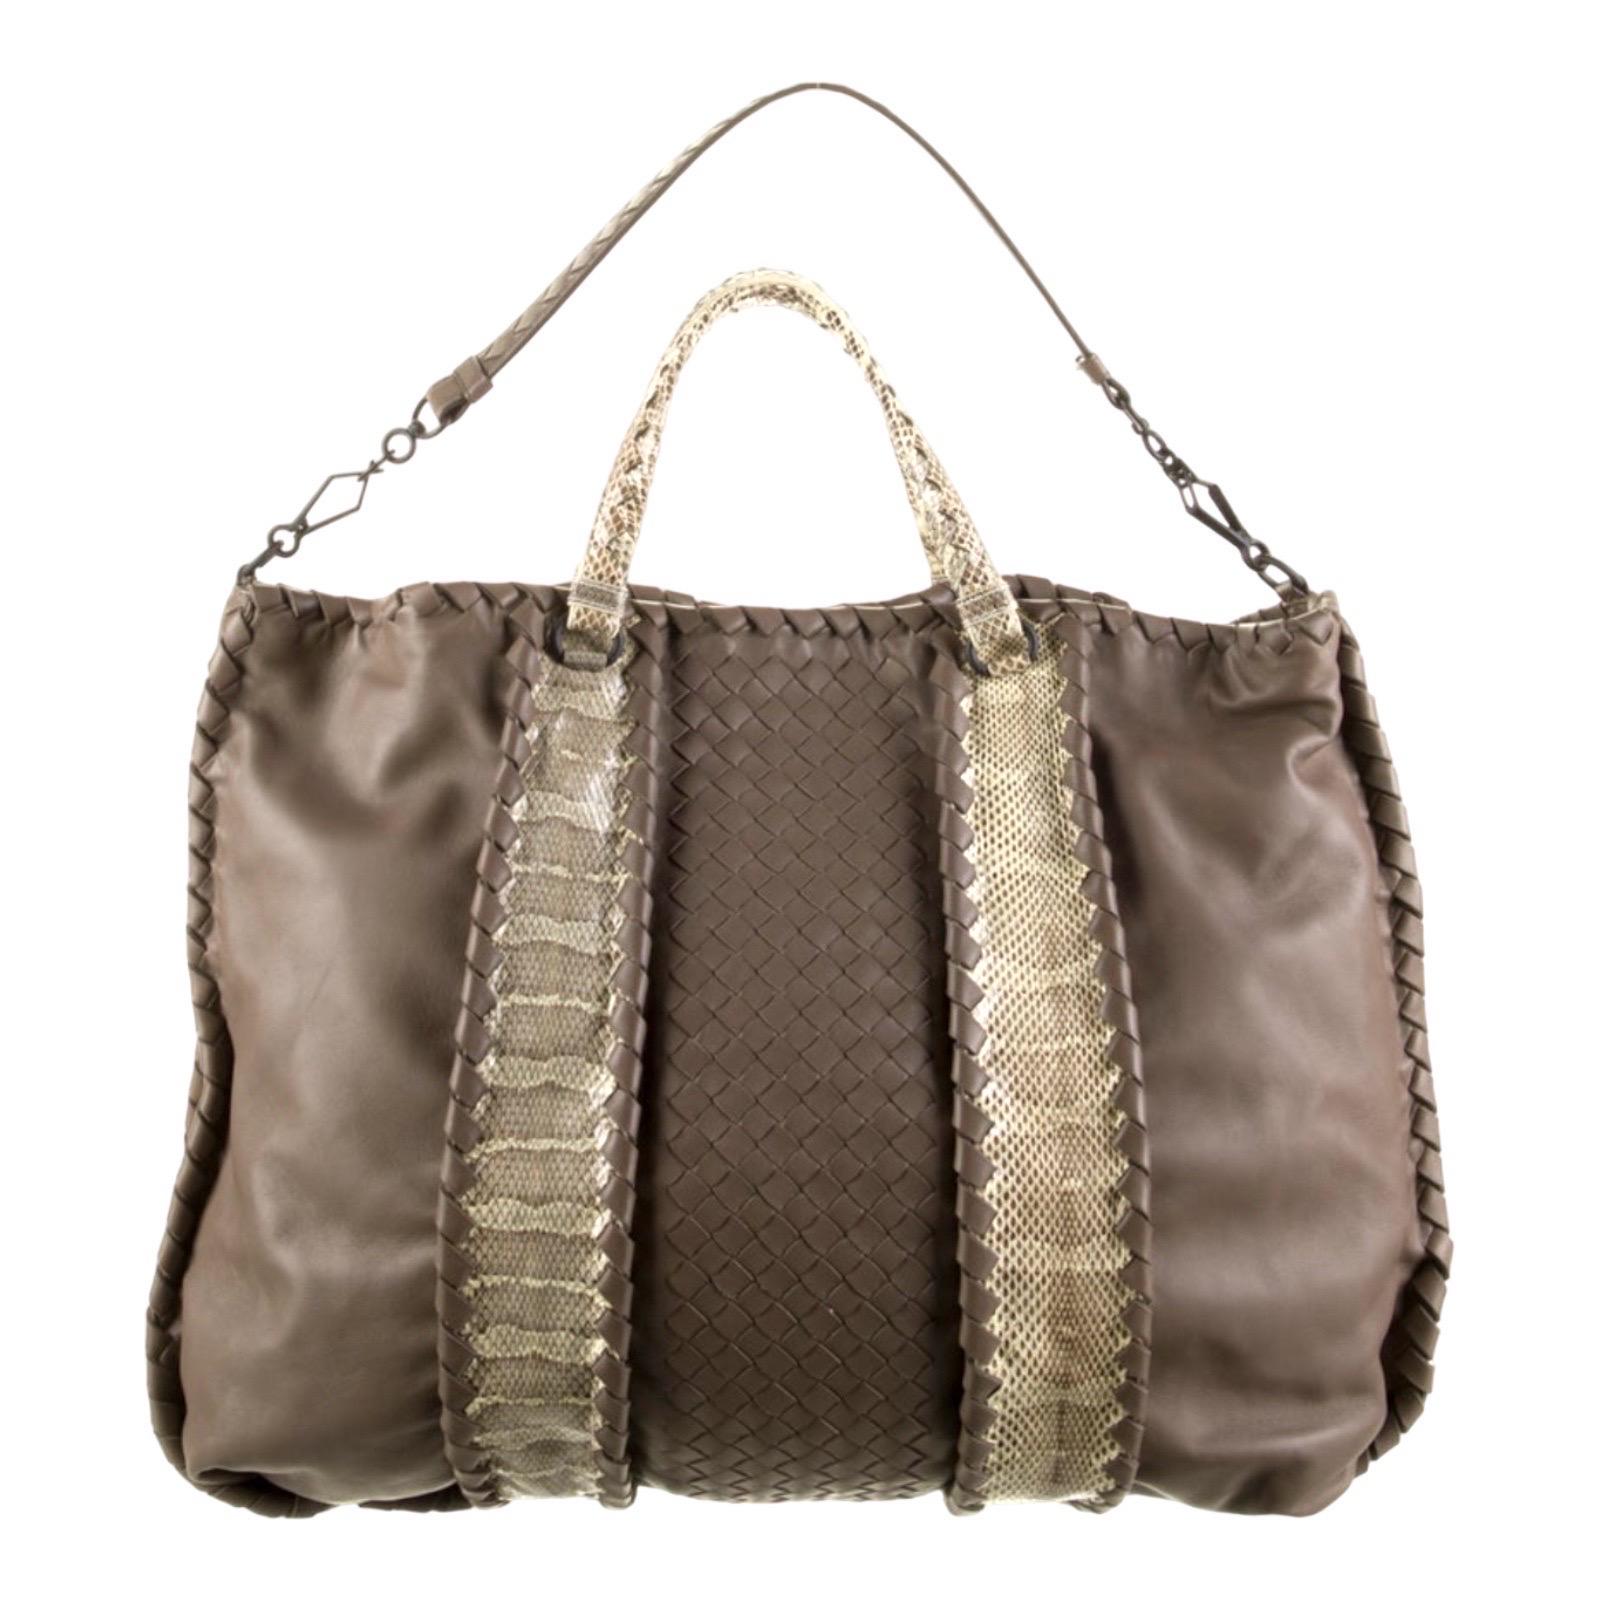 A BOTTEGA VENETA signature piece that will last you for many years

Exotic snakeskin embellishes this Bottega Veneta tote, offering an on-trend upgrade to the house's conventionally clean, intrecciato woven leather construction.

Bottega Veneta's